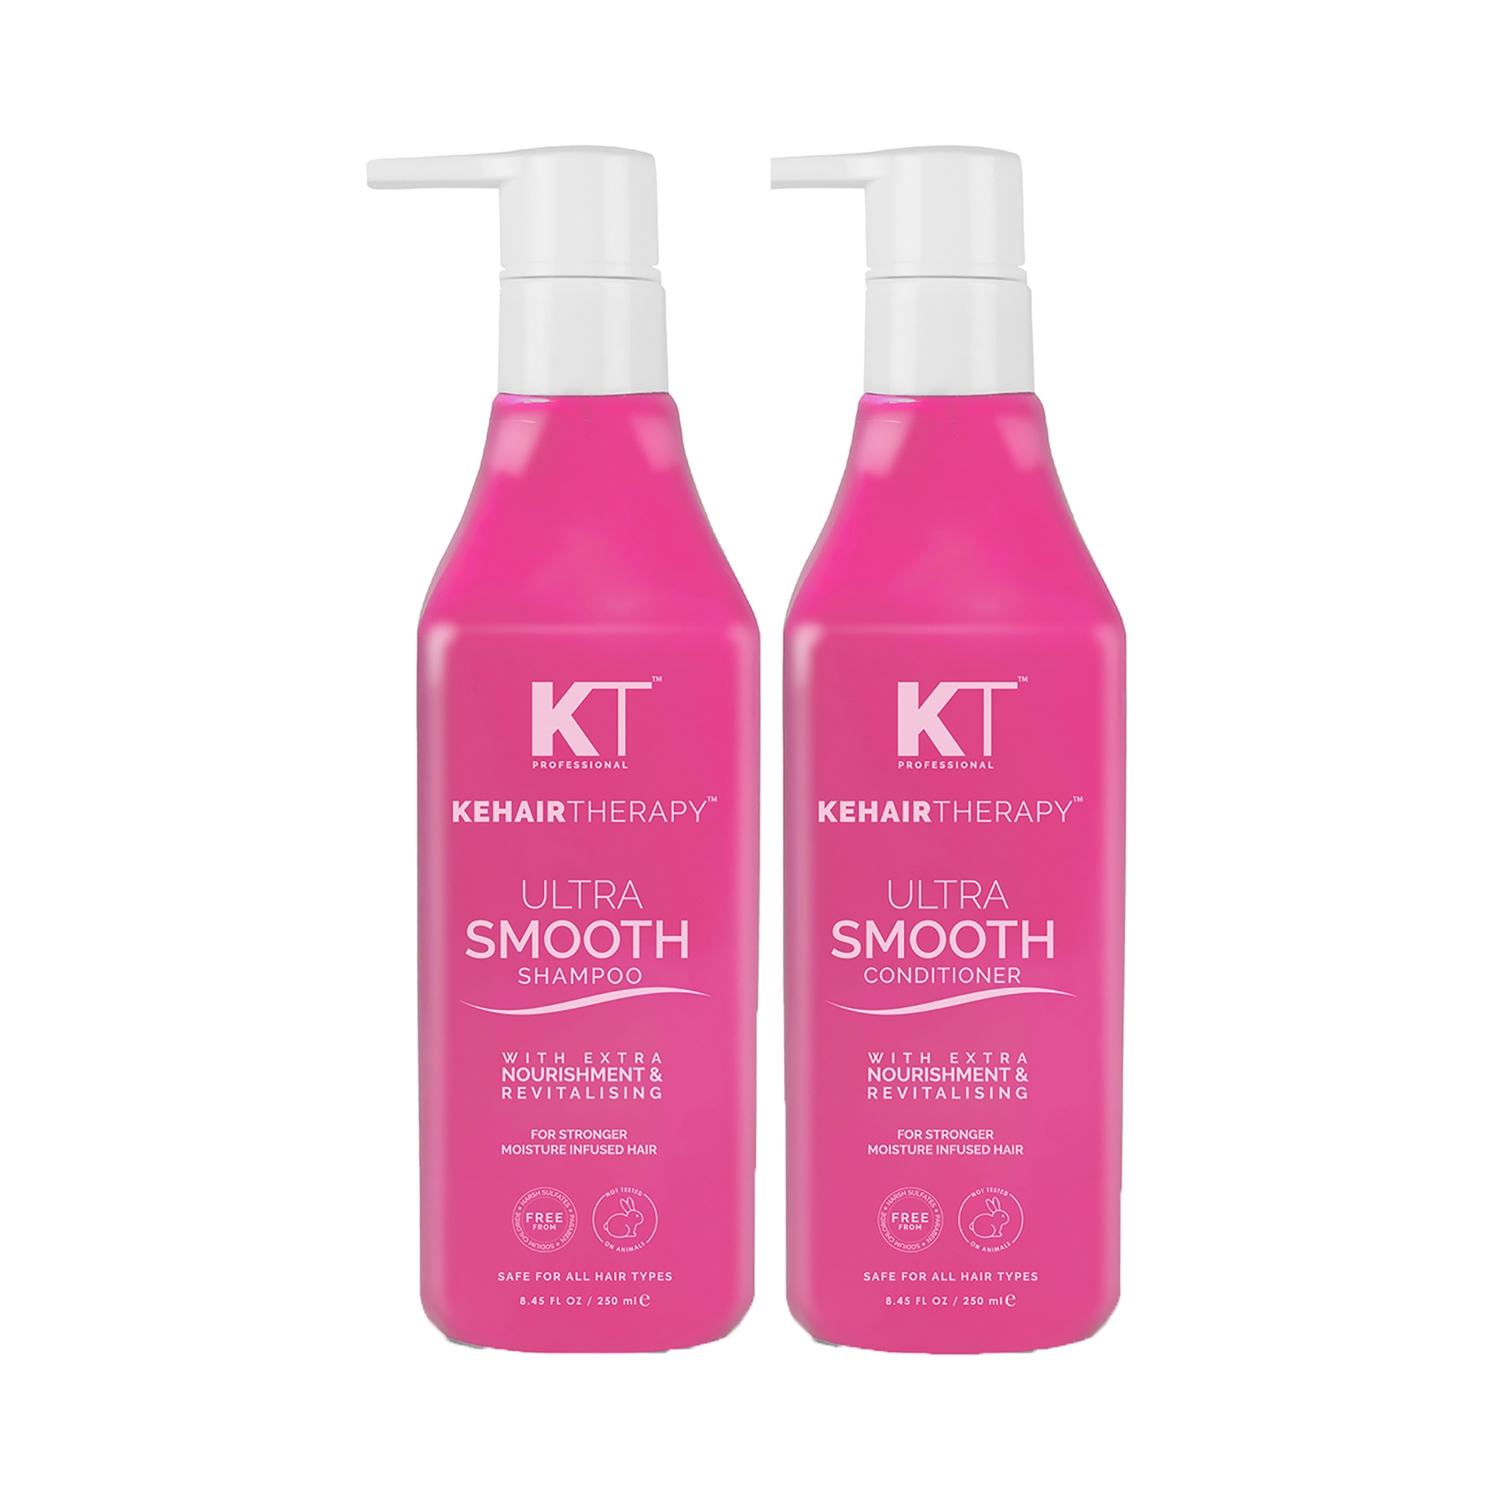 KT Professional | KT Professional Kehairtherapy Ultra Smooth Shampoo & Conditioner Combo - (2Pcs)